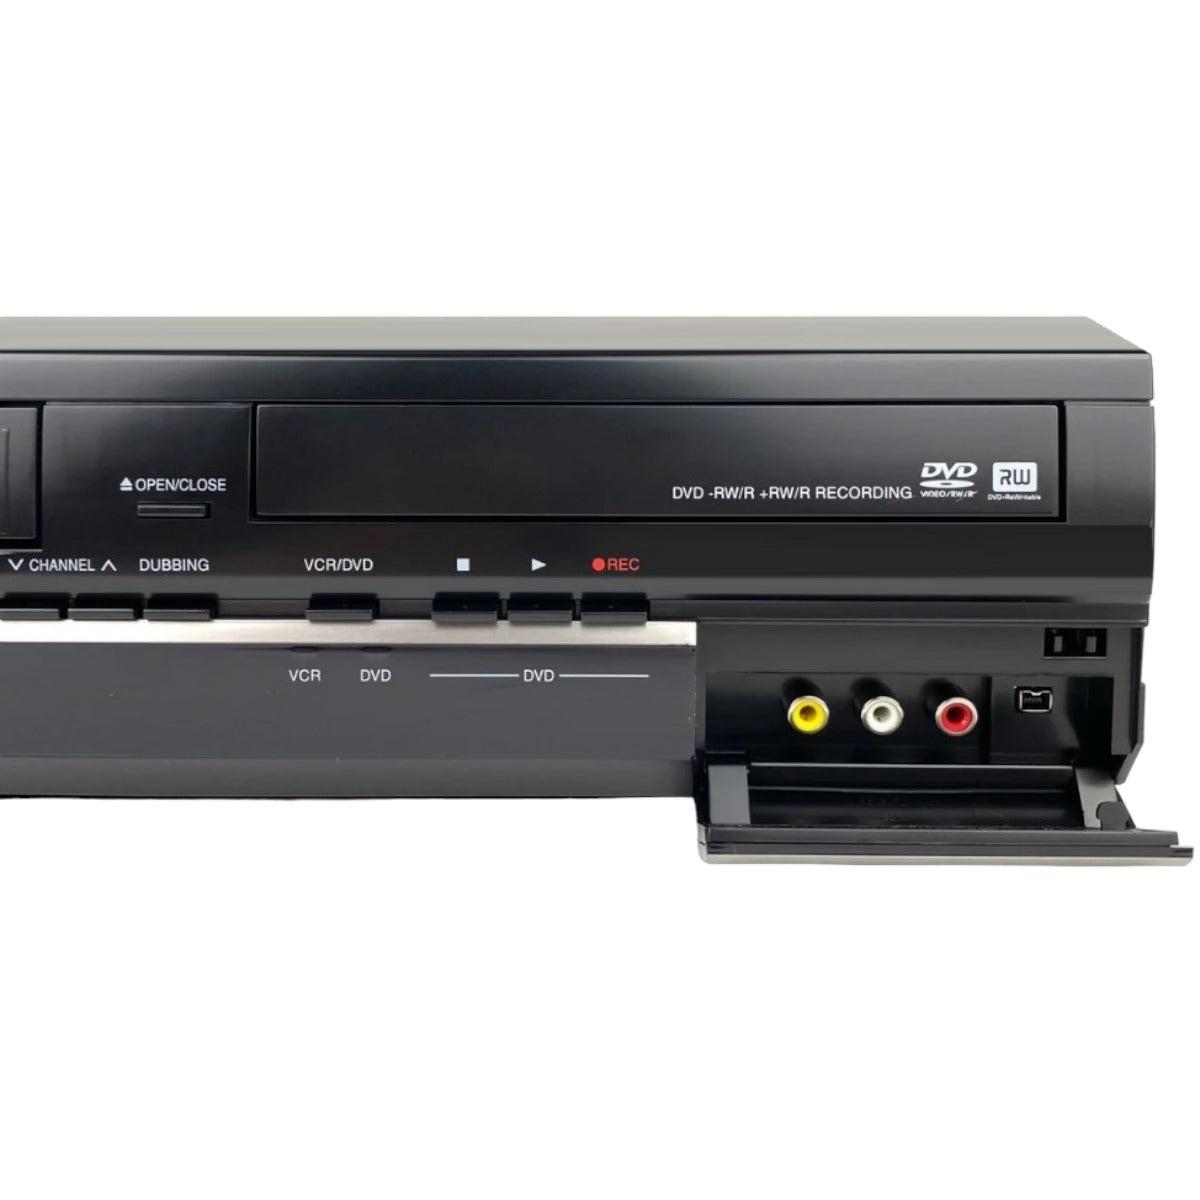 Toshiba D-VR600 (Used) DVD/VCR Recorder Combo - image 2 of 5